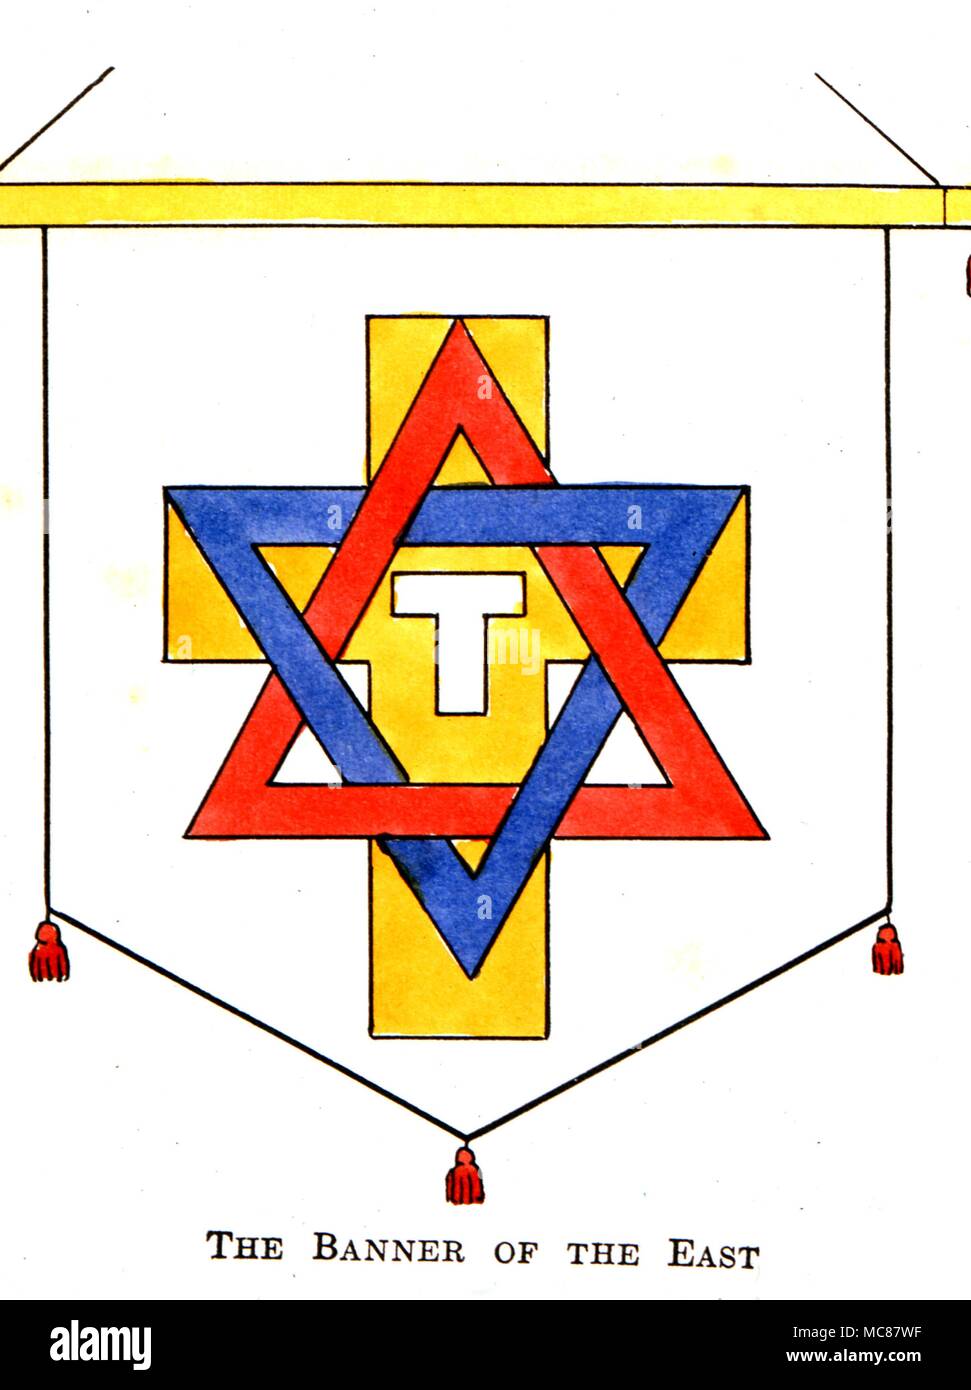 Conjuration banner The Banner of the East used by the Order of the Golden Dawn in conjuration practices. To be placed at the eastern side of the room. Stock Photo